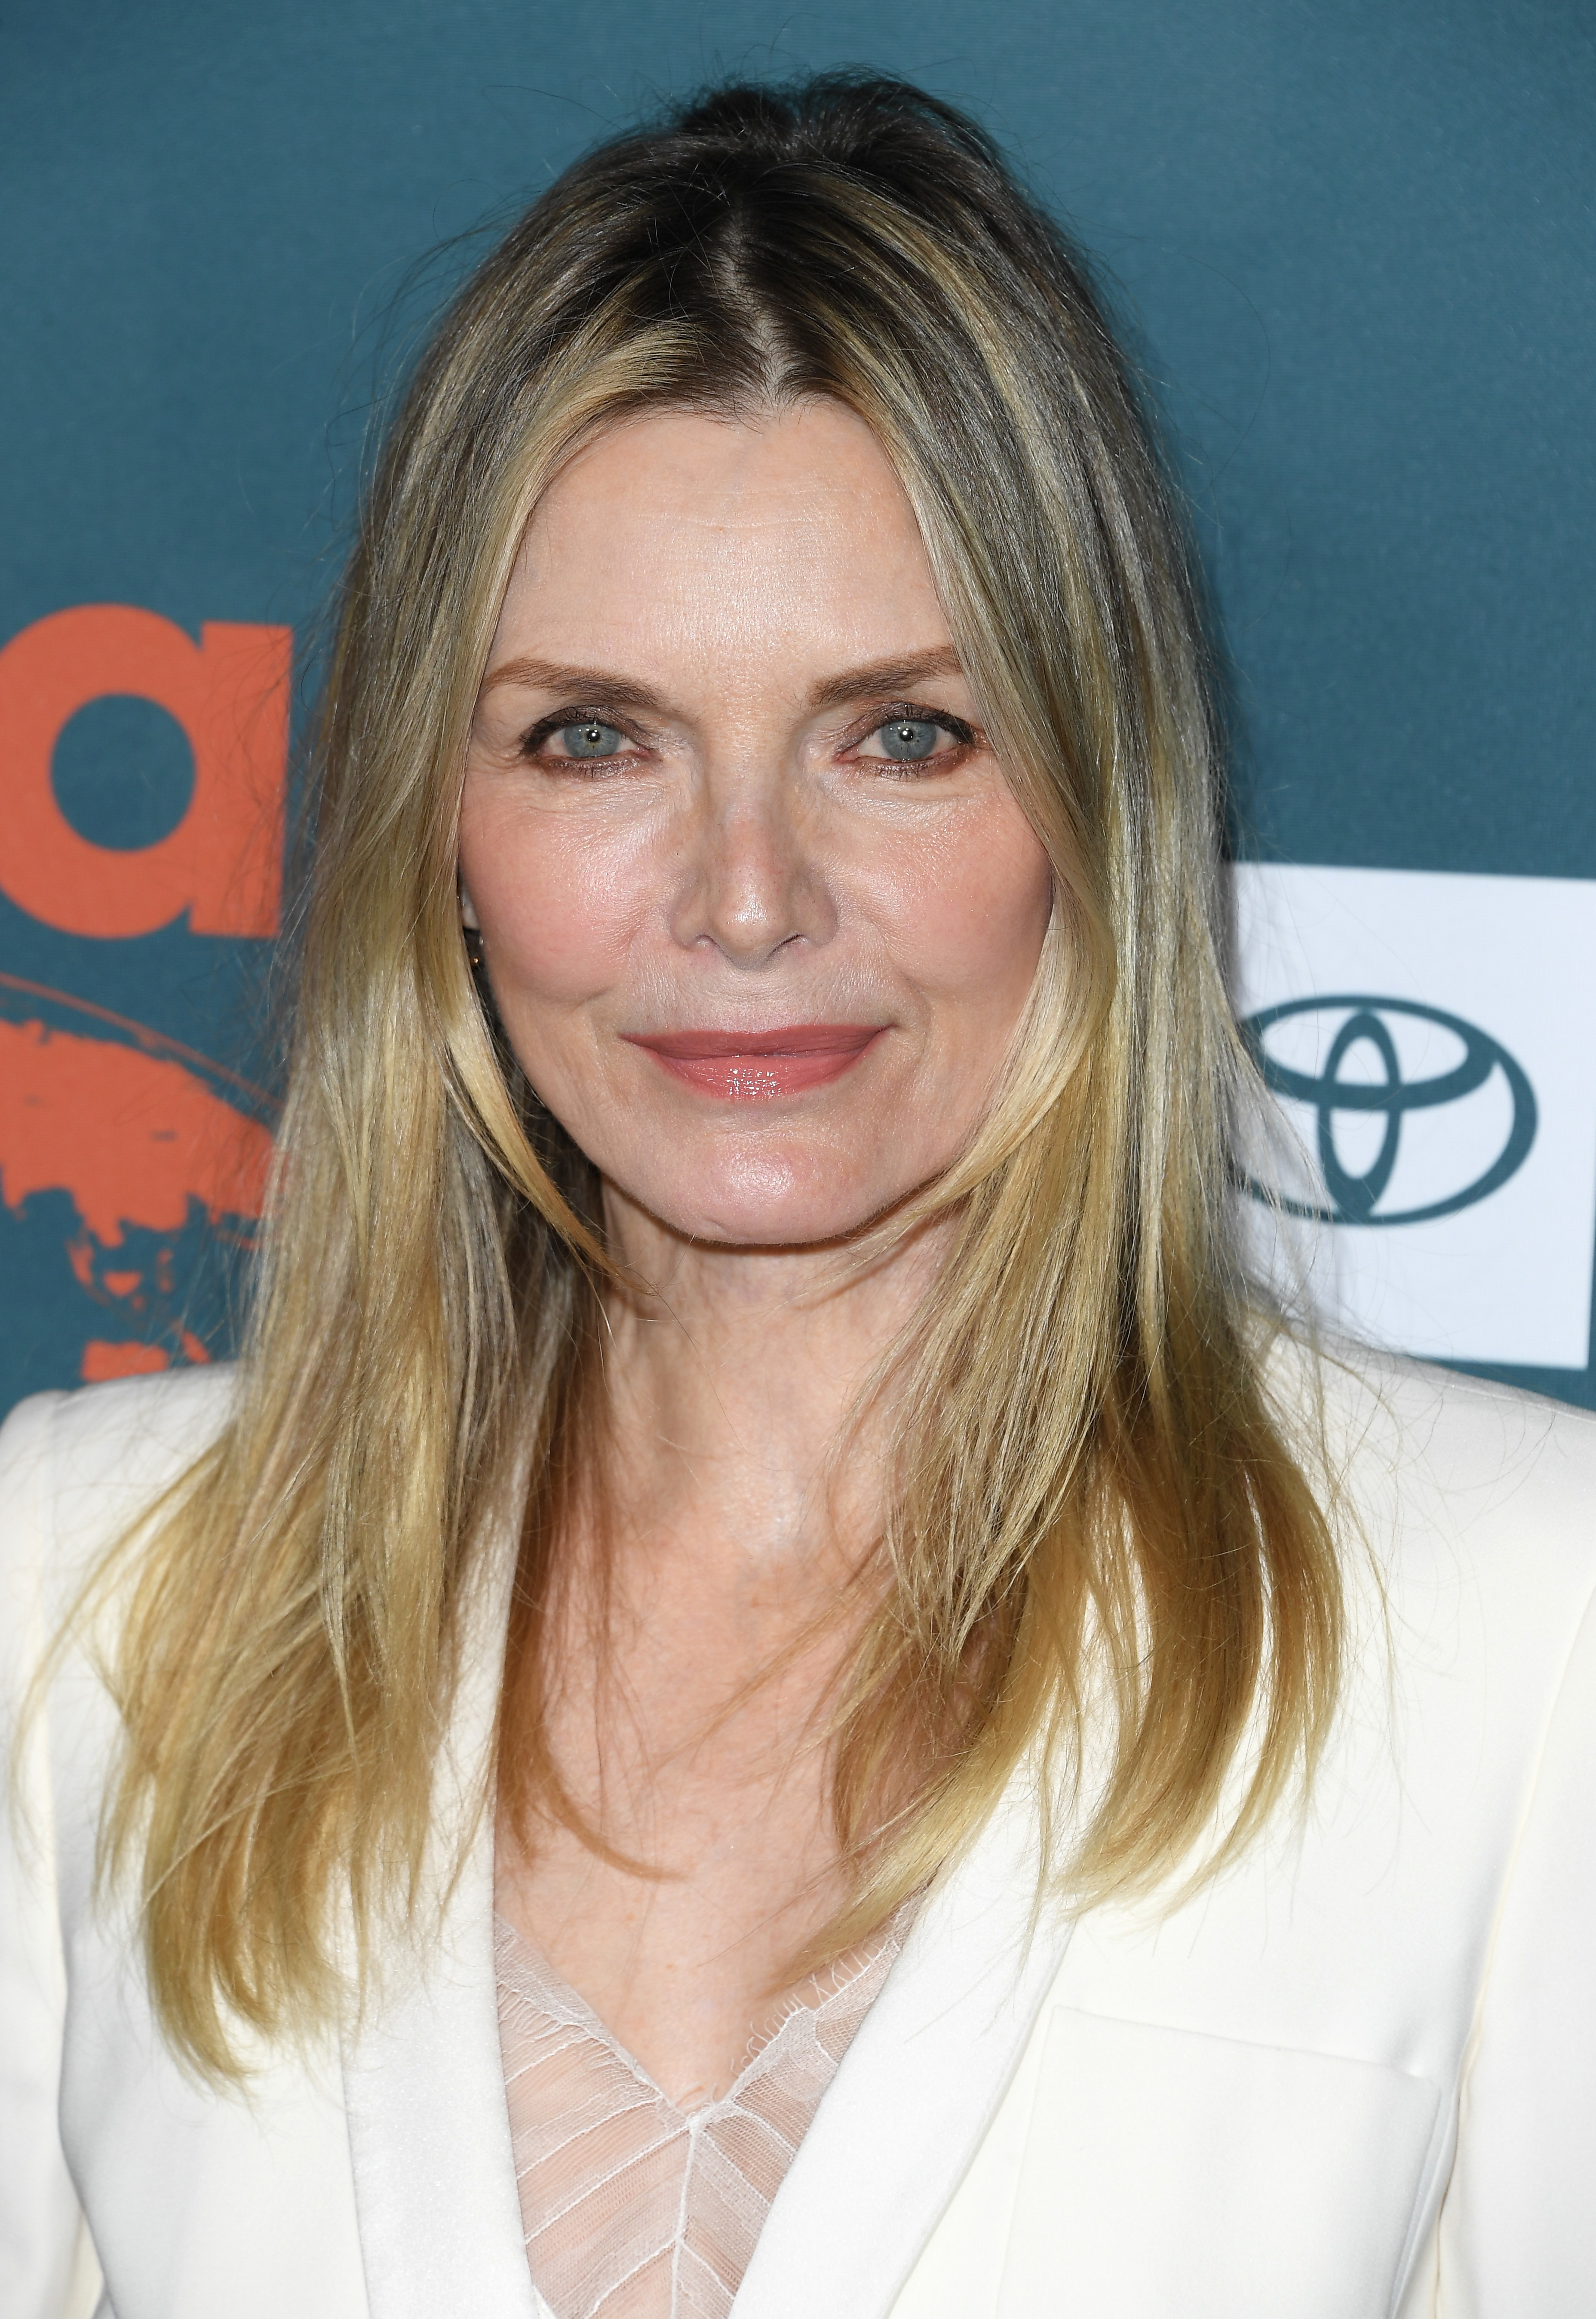 Michelle Pfeiffer in a blazer over a lace-detailed top at an event